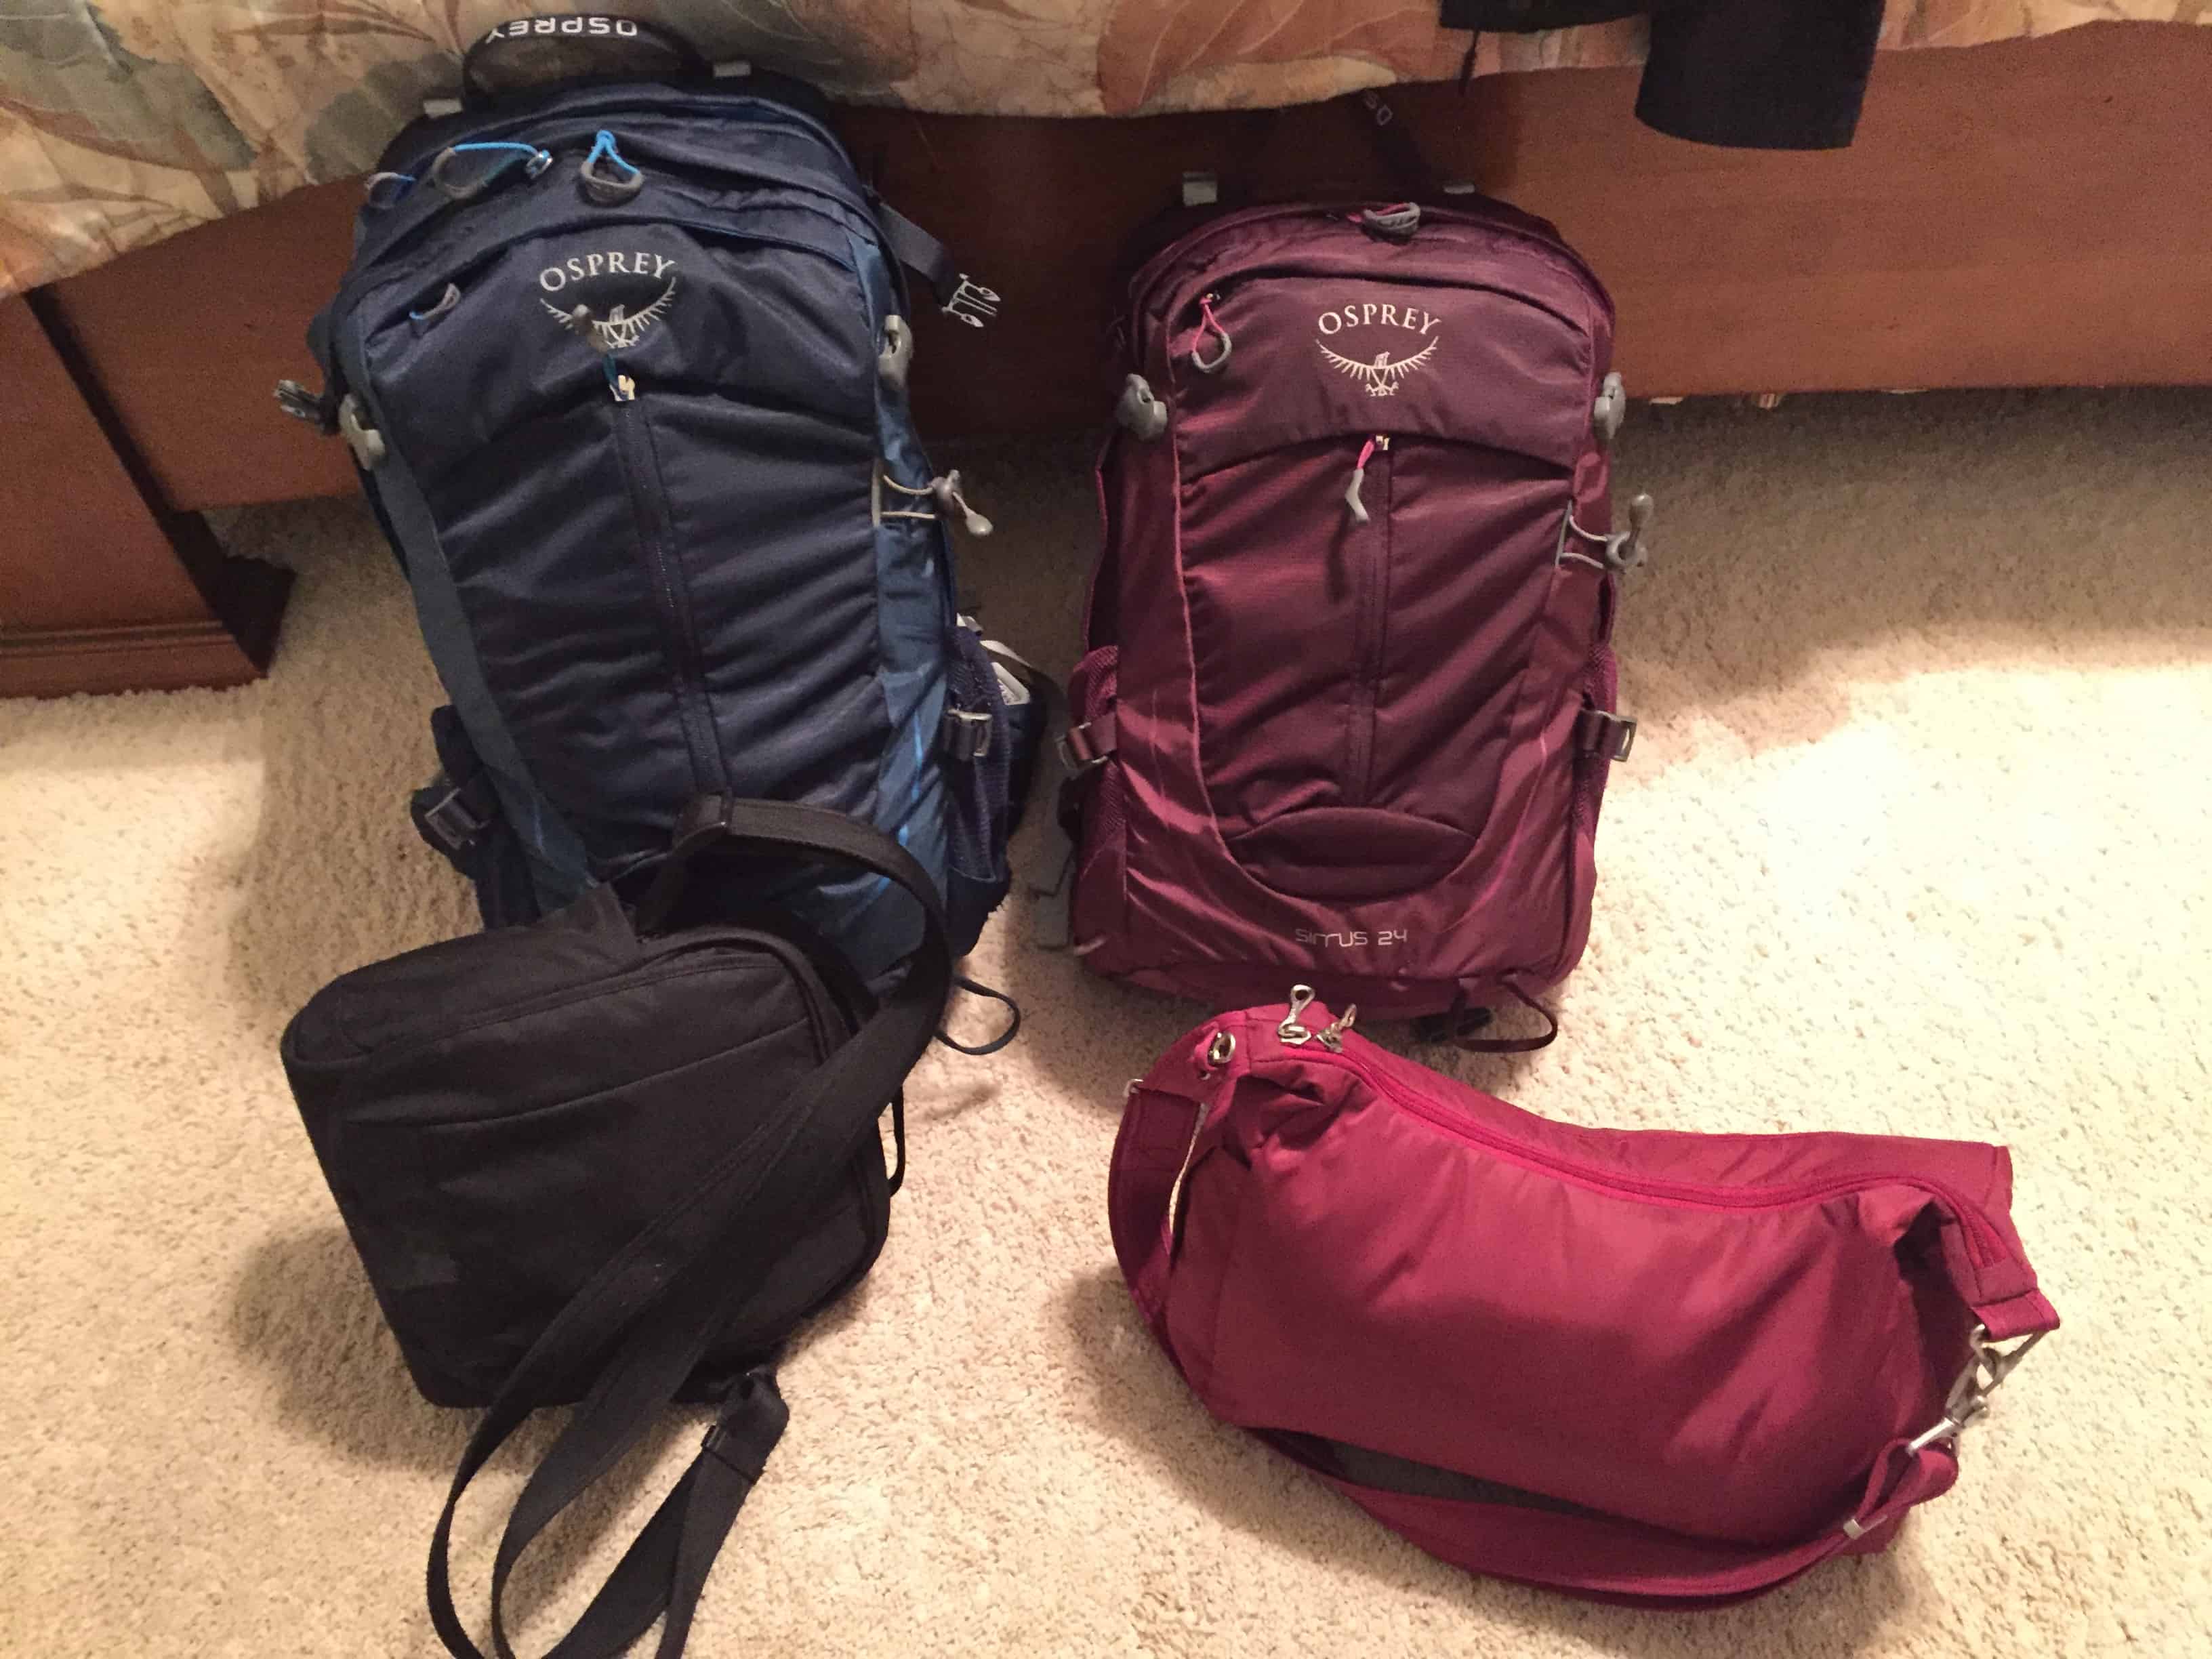 Osprey backpacks ready our trip to the UK - The Places Where We Go Podcast